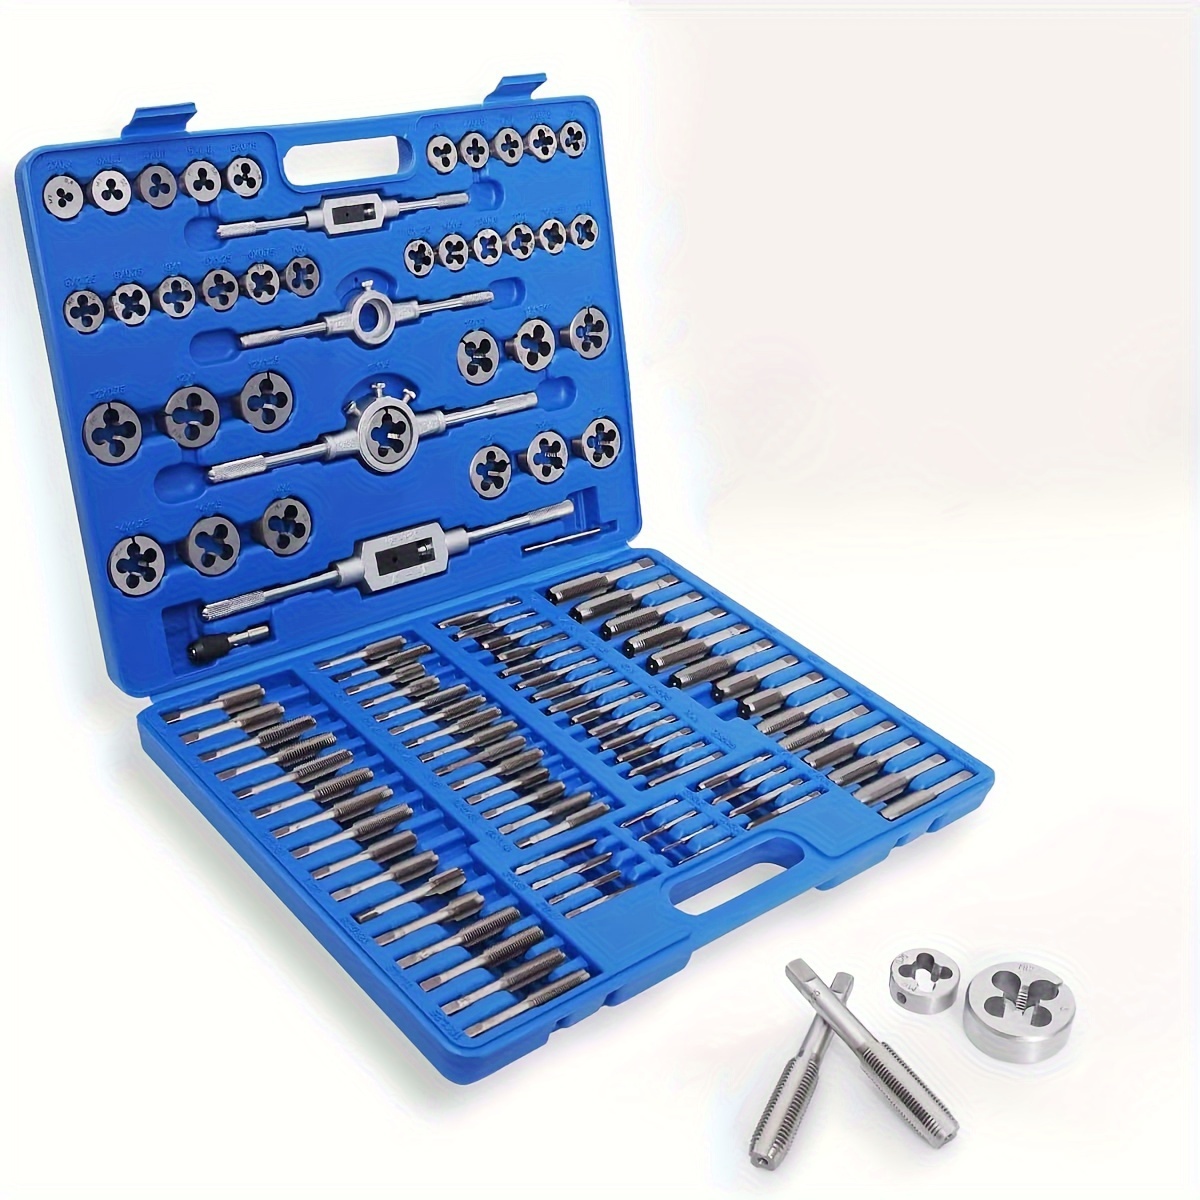 

110pcs Tap And Die Set, Metric Tap And Die Rethreading Kit, Thread Chaser Set For Cutting External And Internal Threads, Metric Size M2 To M18 With Storage Case